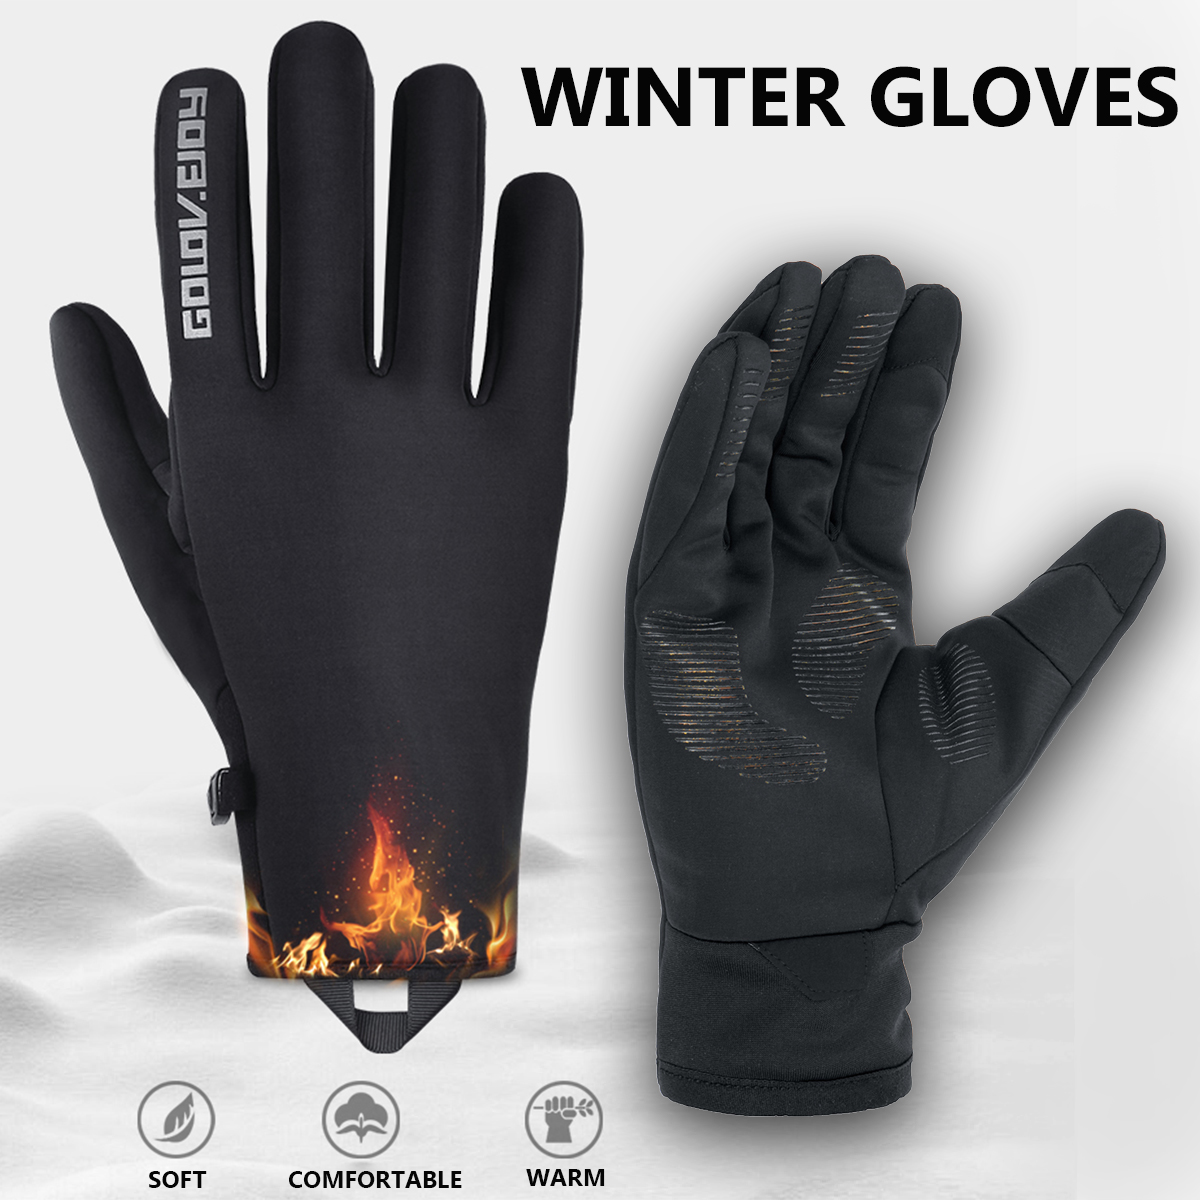 Winter-Warm-Thermal-Gloves-Skiing-Snow-Snowboard-Cycling-Touchscreen-Waterproof-Windproof-Gloves-1613607-1